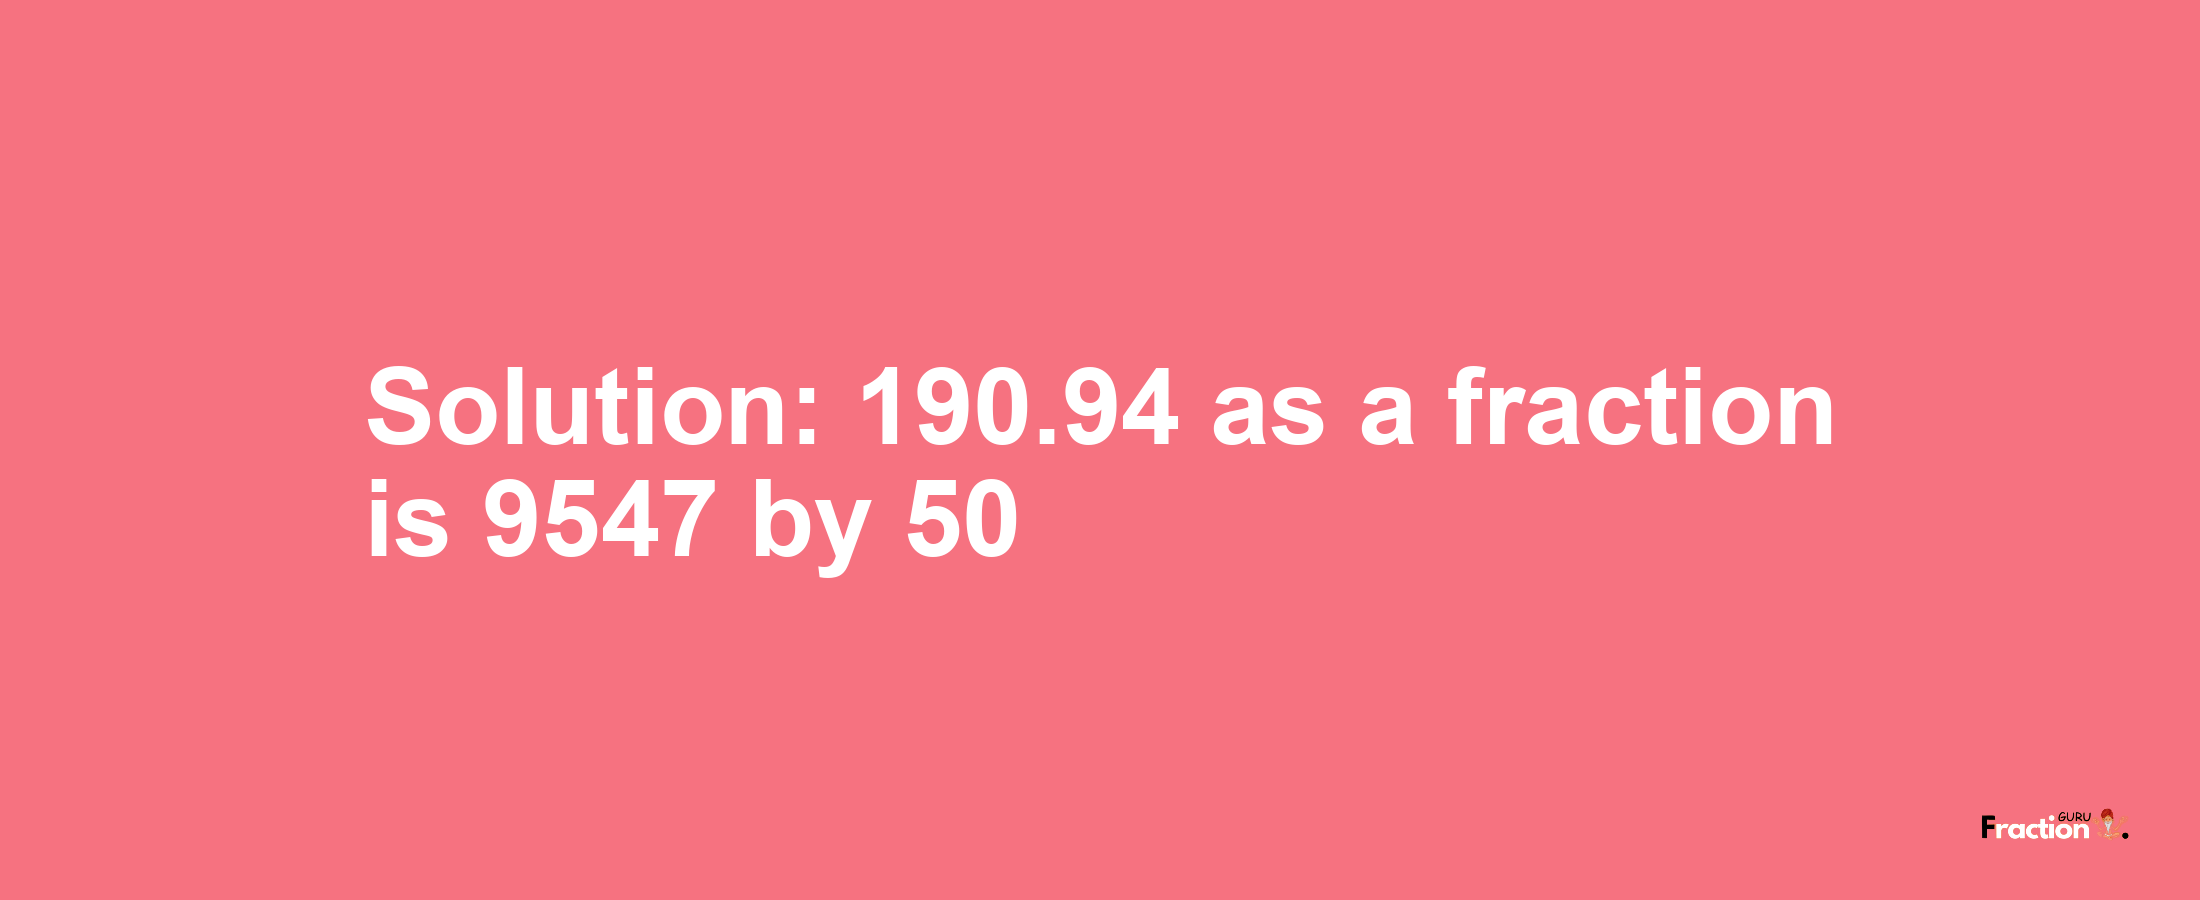 Solution:190.94 as a fraction is 9547/50